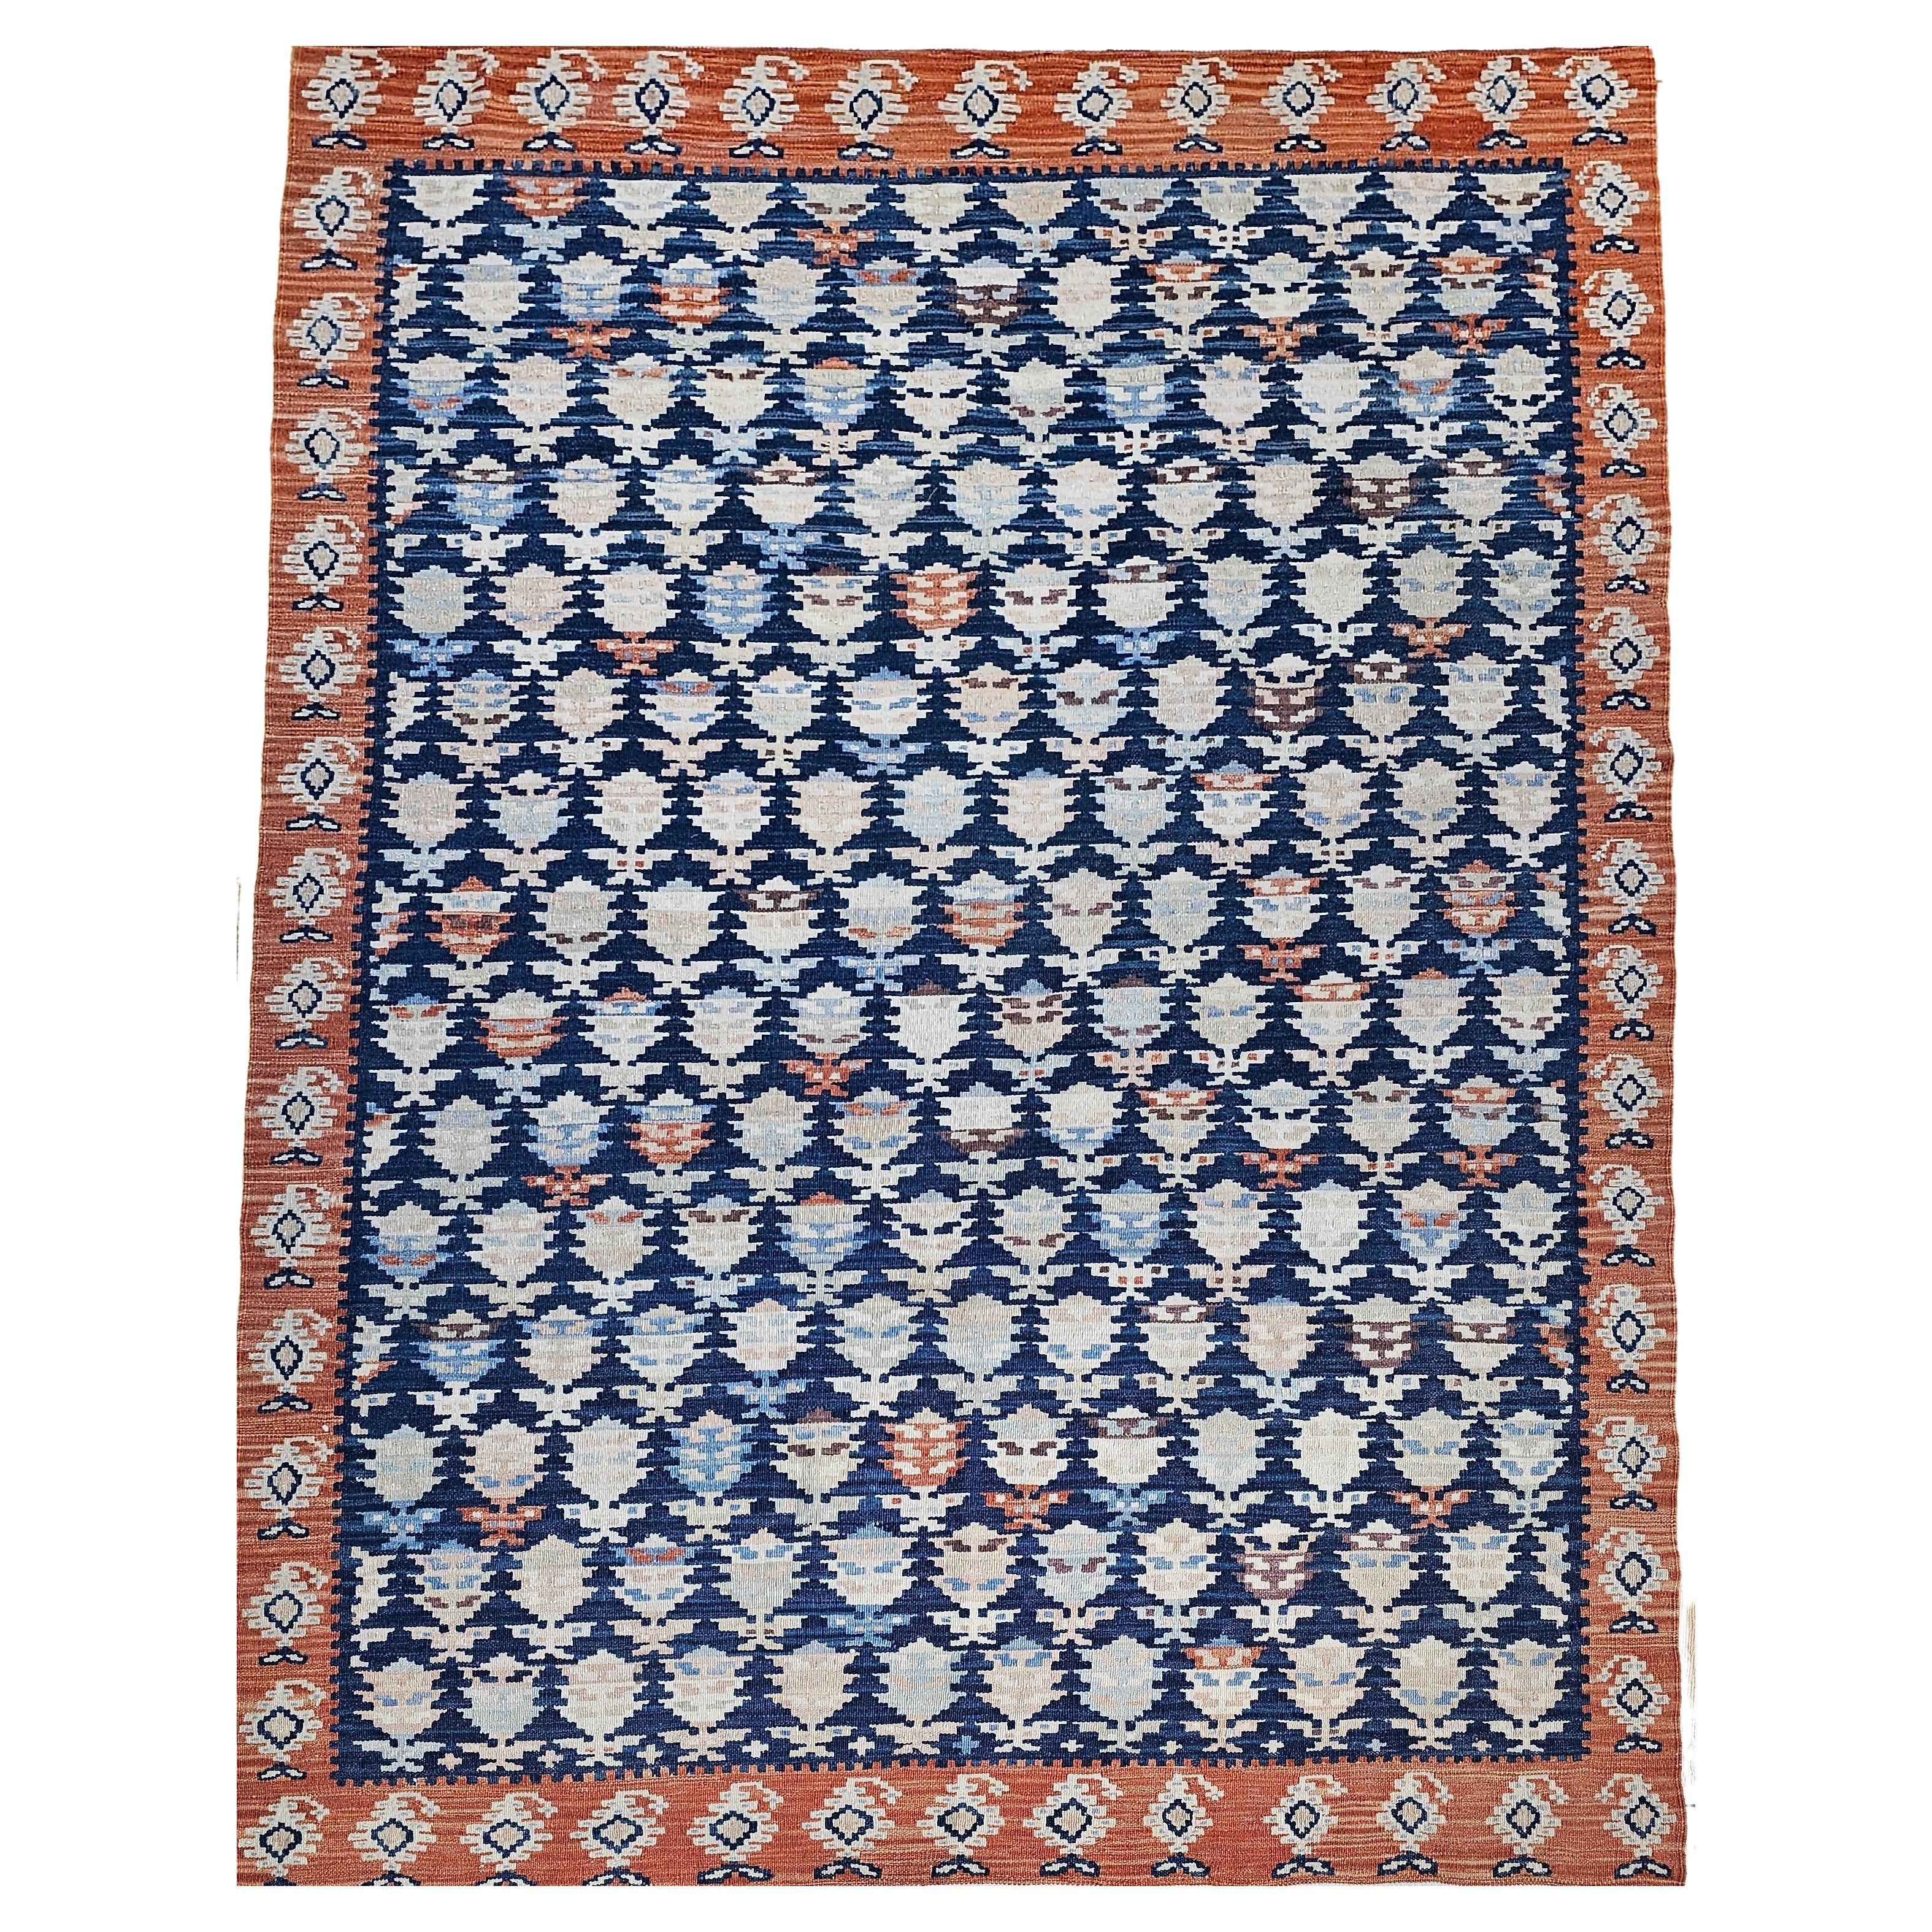 Vintage Persian Kurdish Kilim in All-Over Paisley Pattern in French Blue, Rust